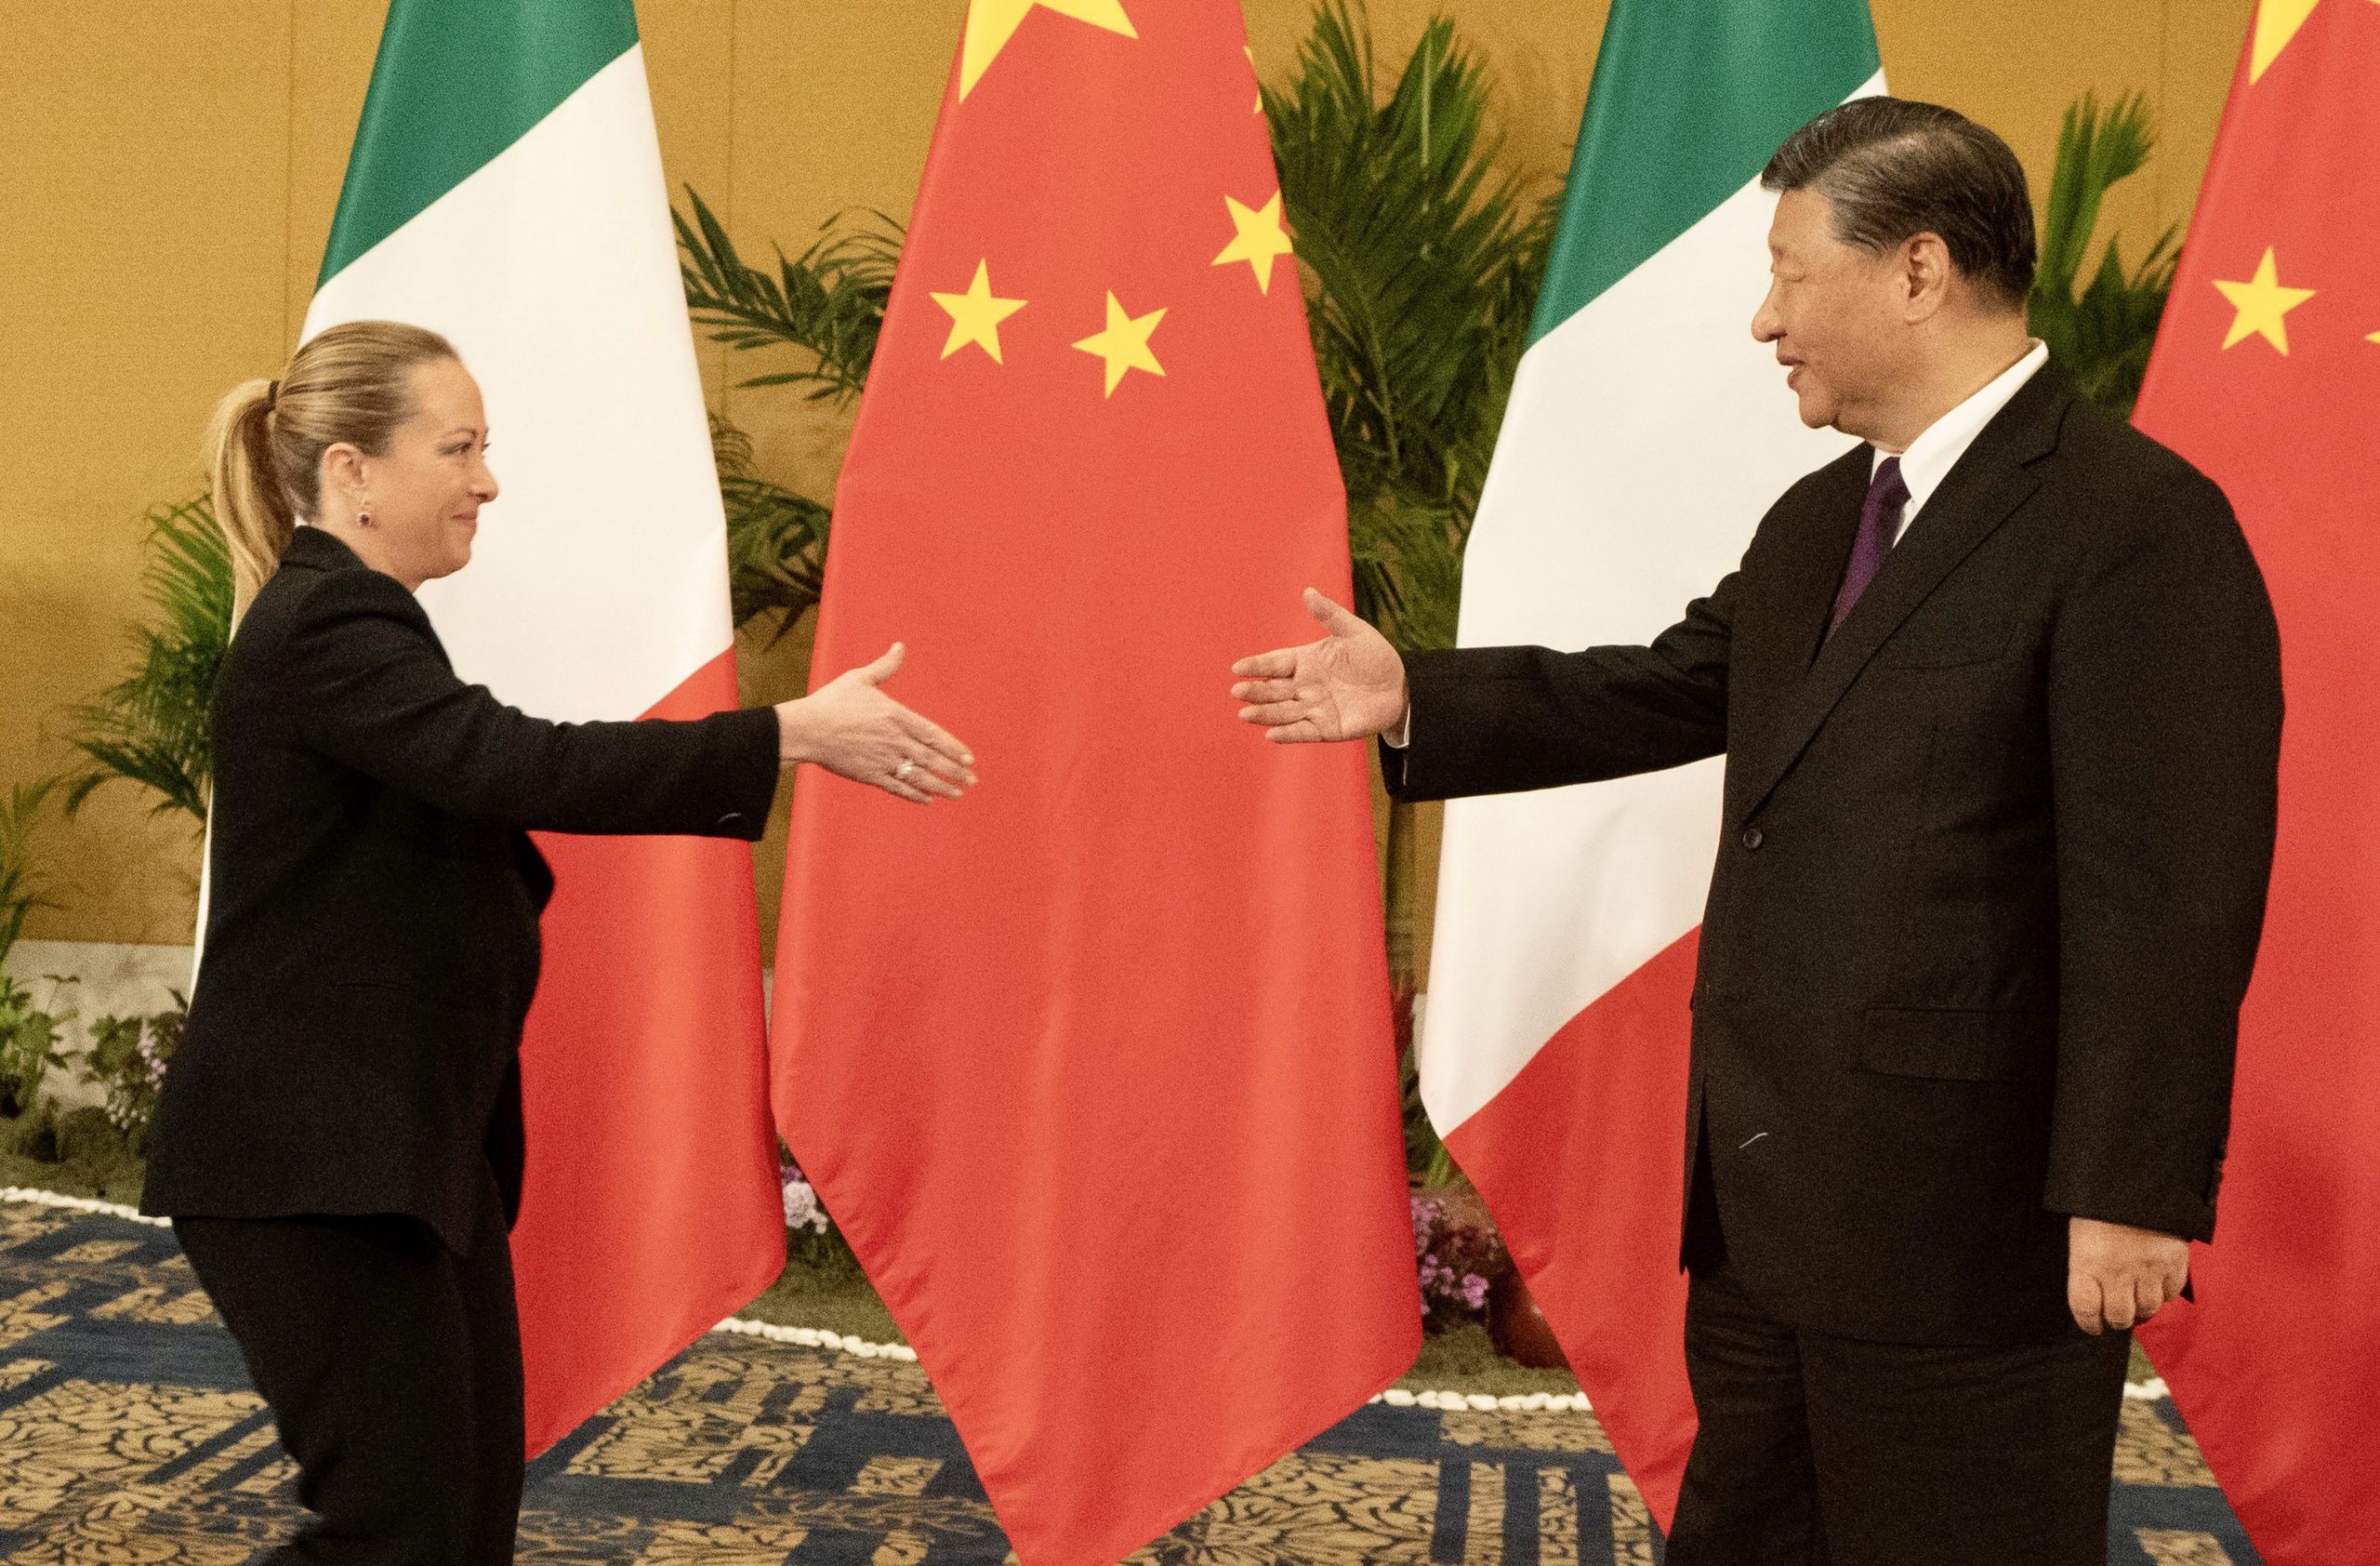 Trade and diplomacy: Italy's next engagements with China